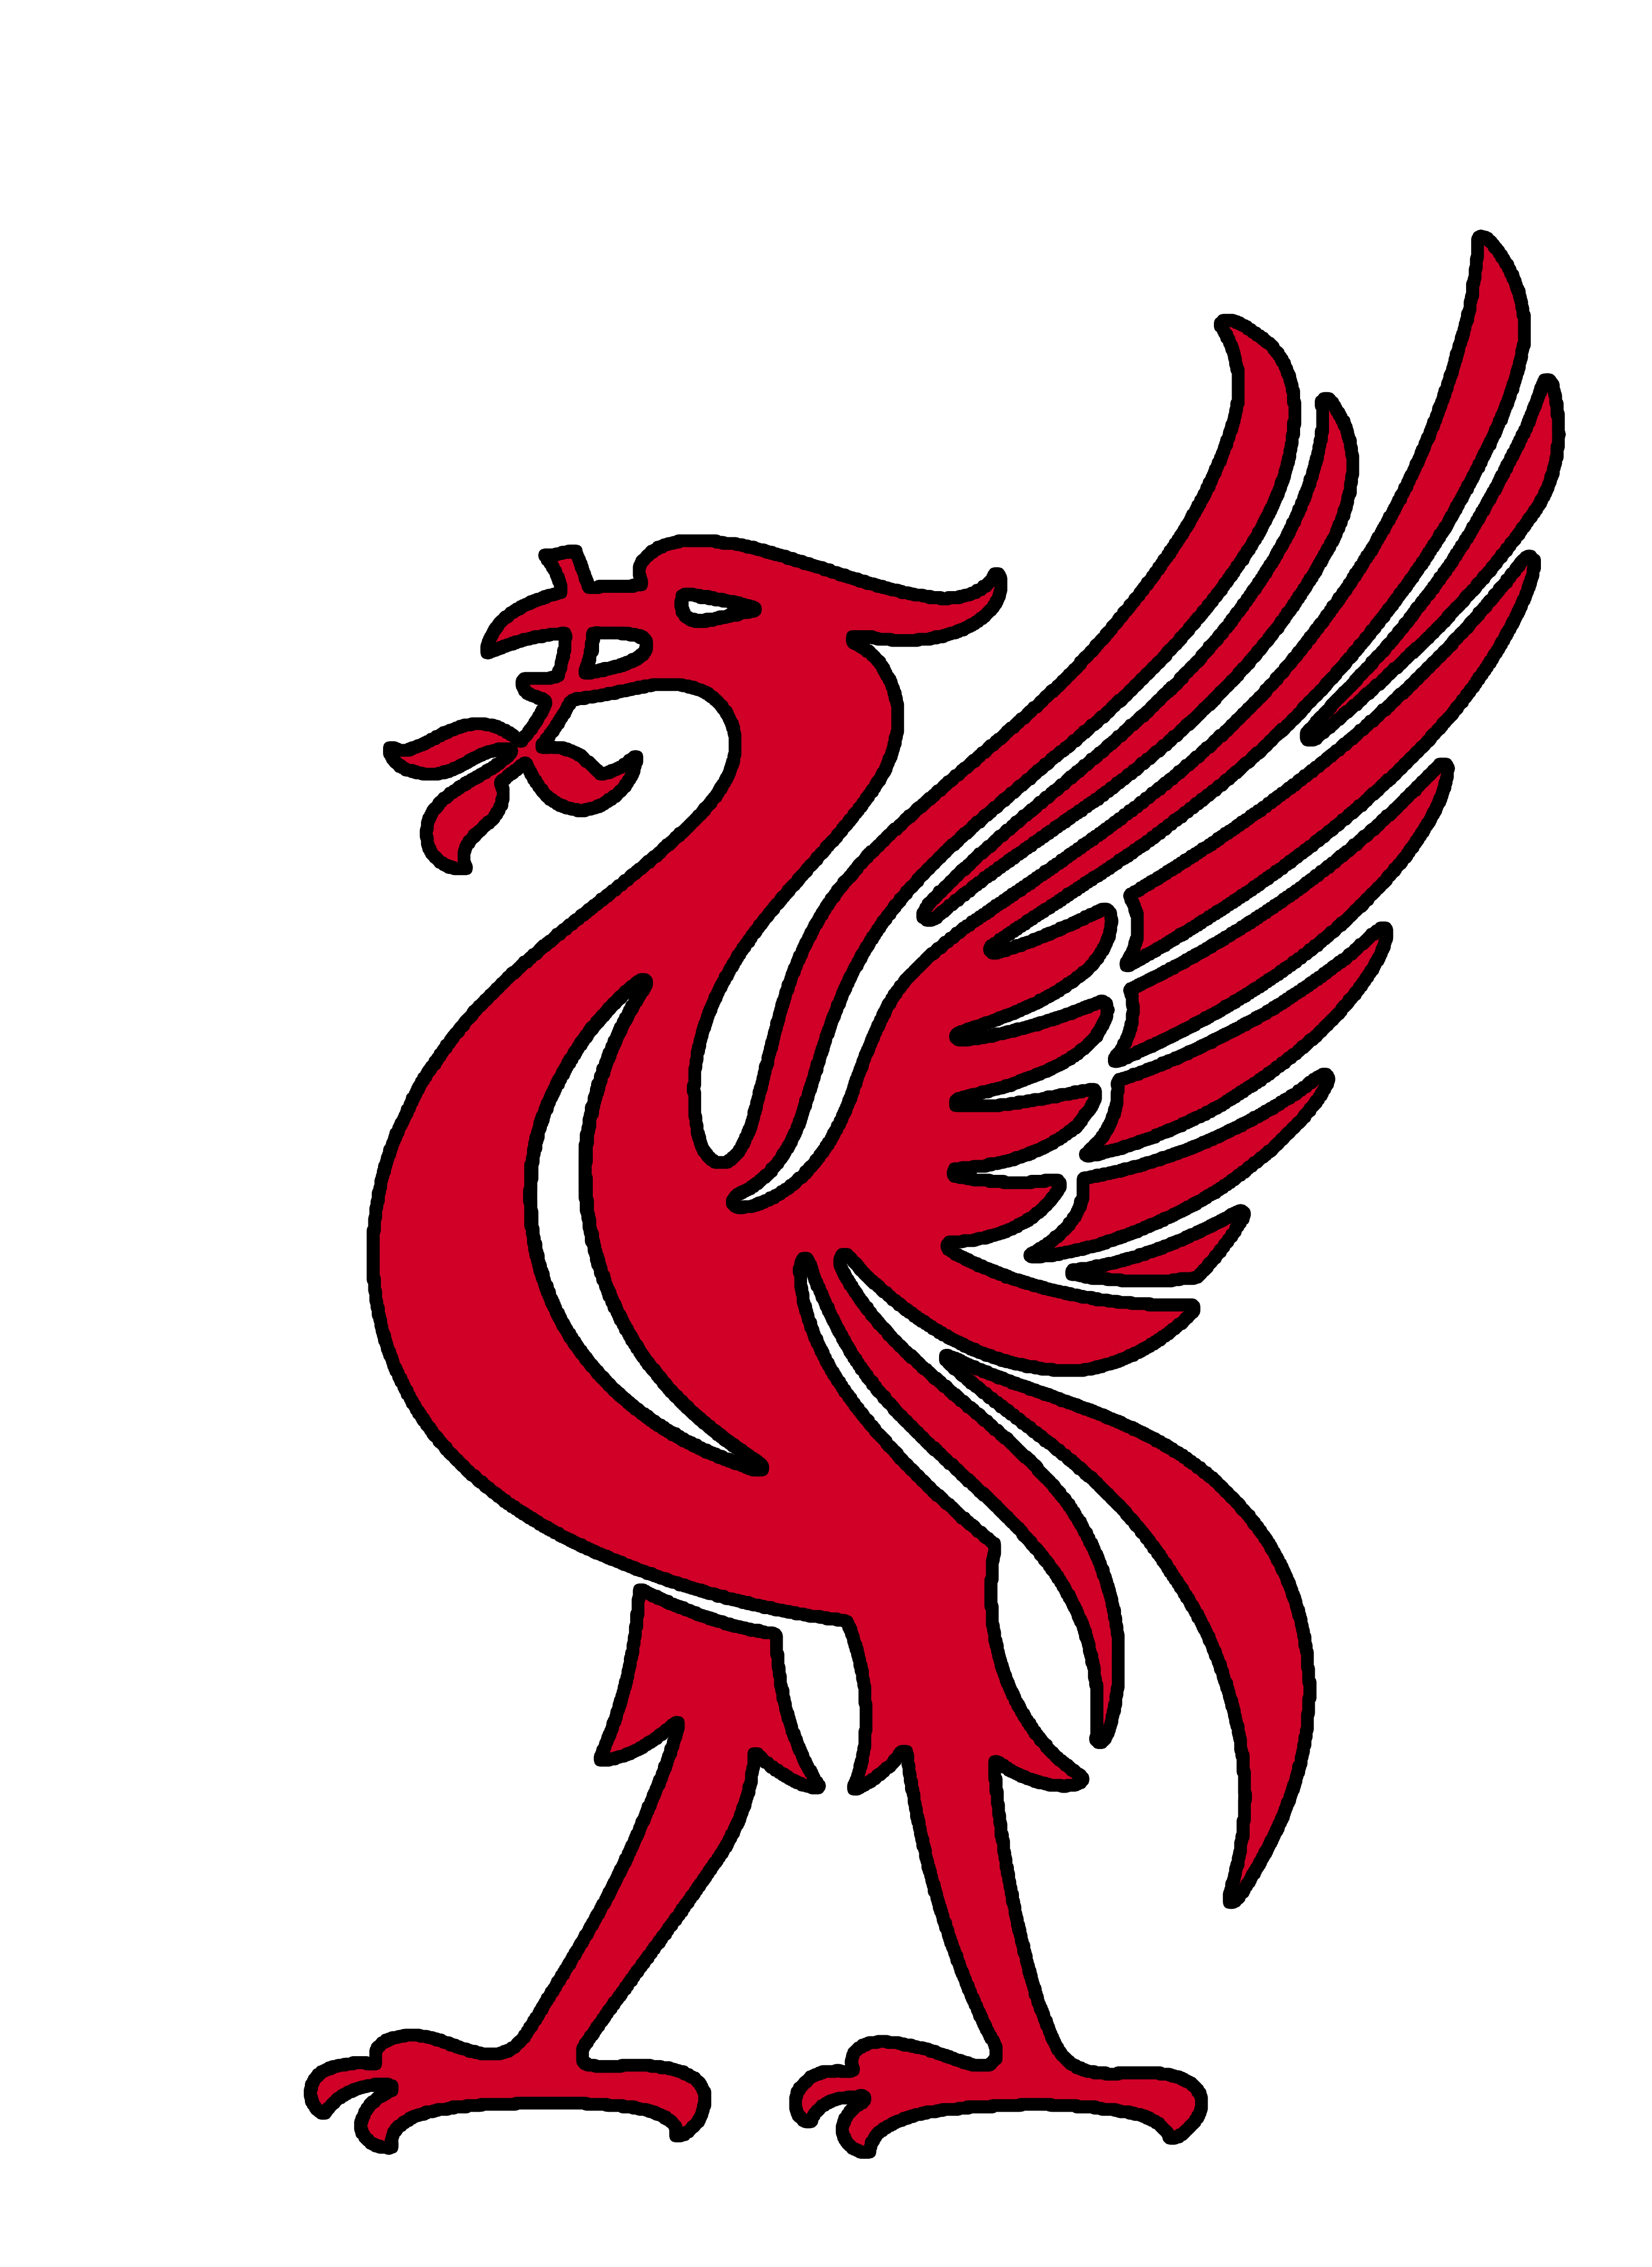 Hq liverbird template by. Criminal clipart capture the flag